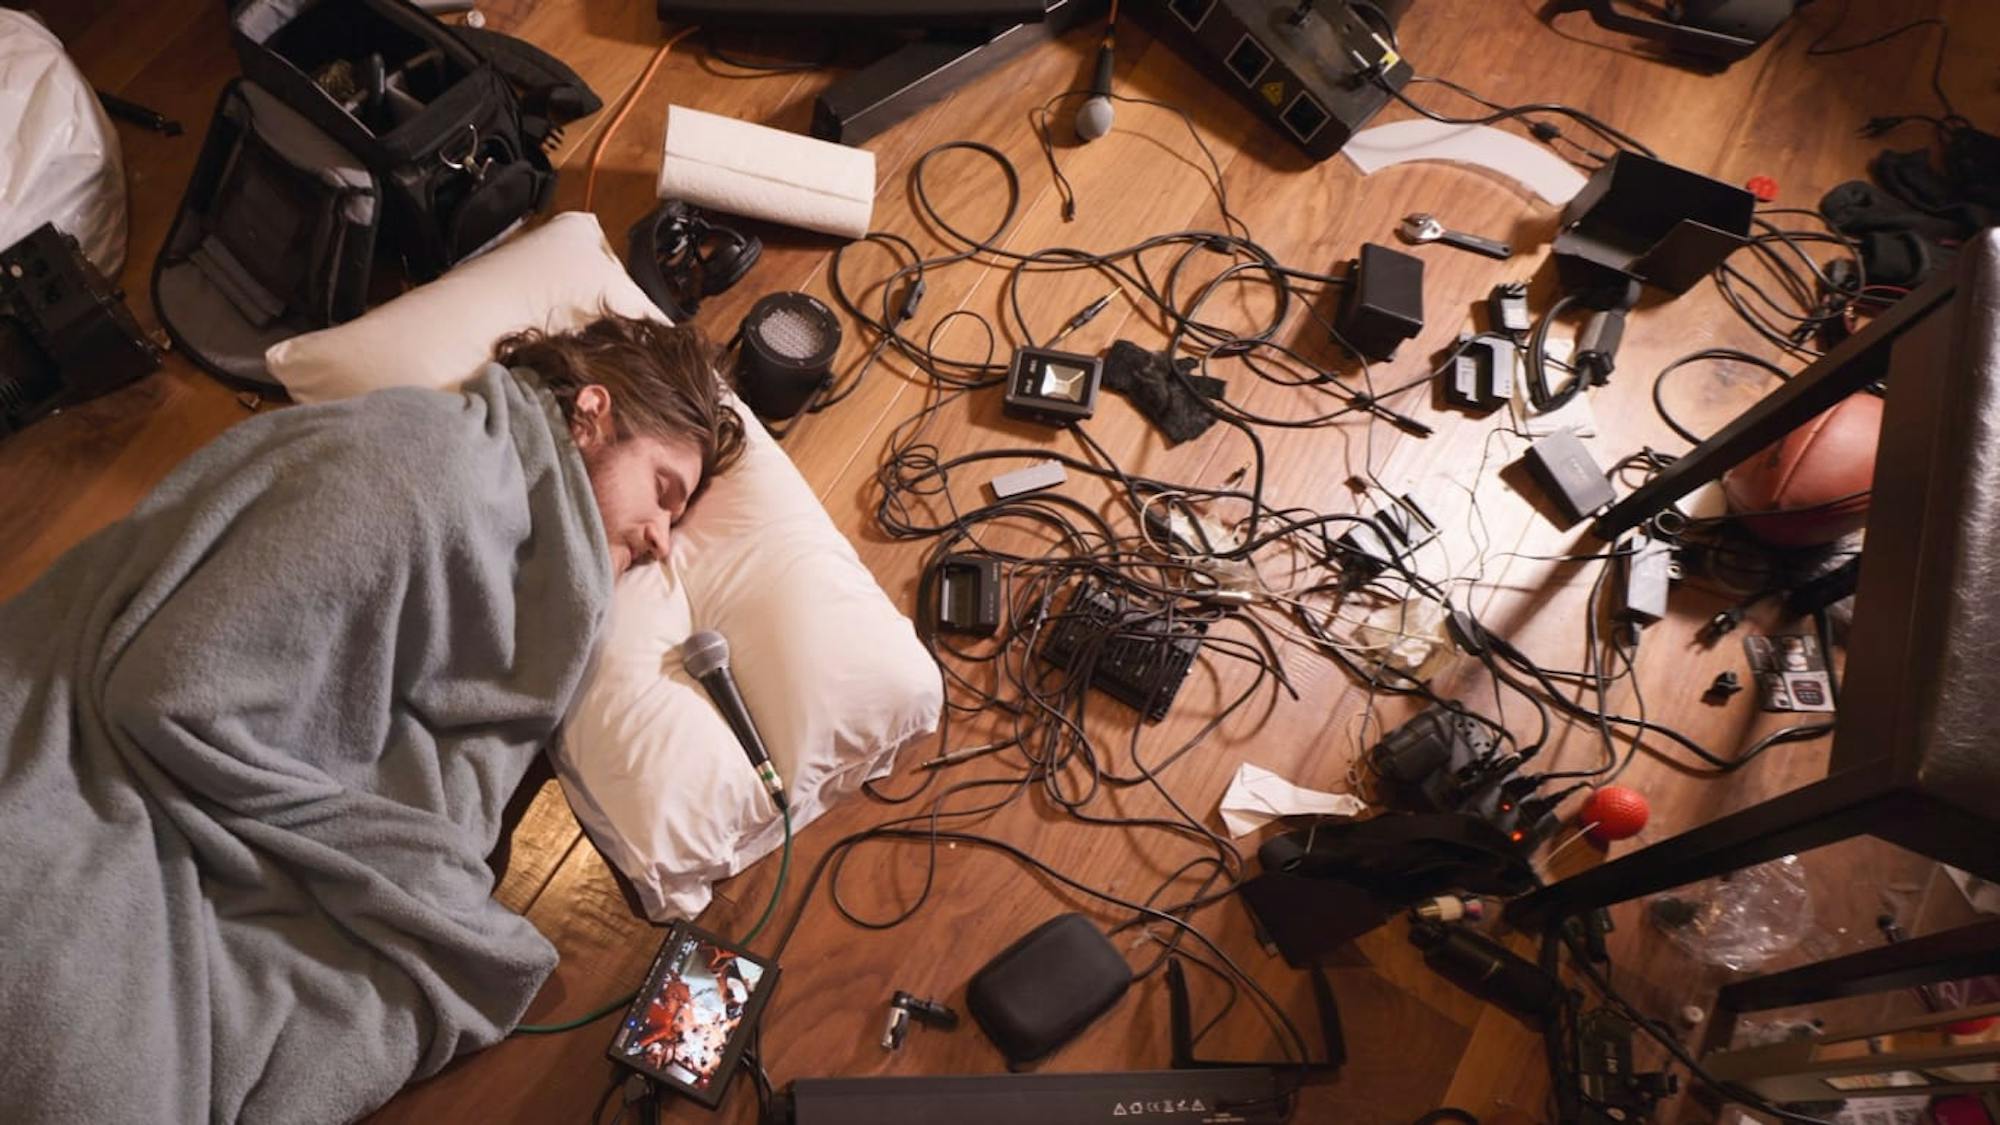 Bo Burnham sleeps on his hardwood floor, head resting against his white pillow. A mike lies pointing towards his mouth, and the floor is covered with cords and machines. Bo is wrapped in a grey blanket. The mess is chaotic, including a basketball, ipad, and stool.